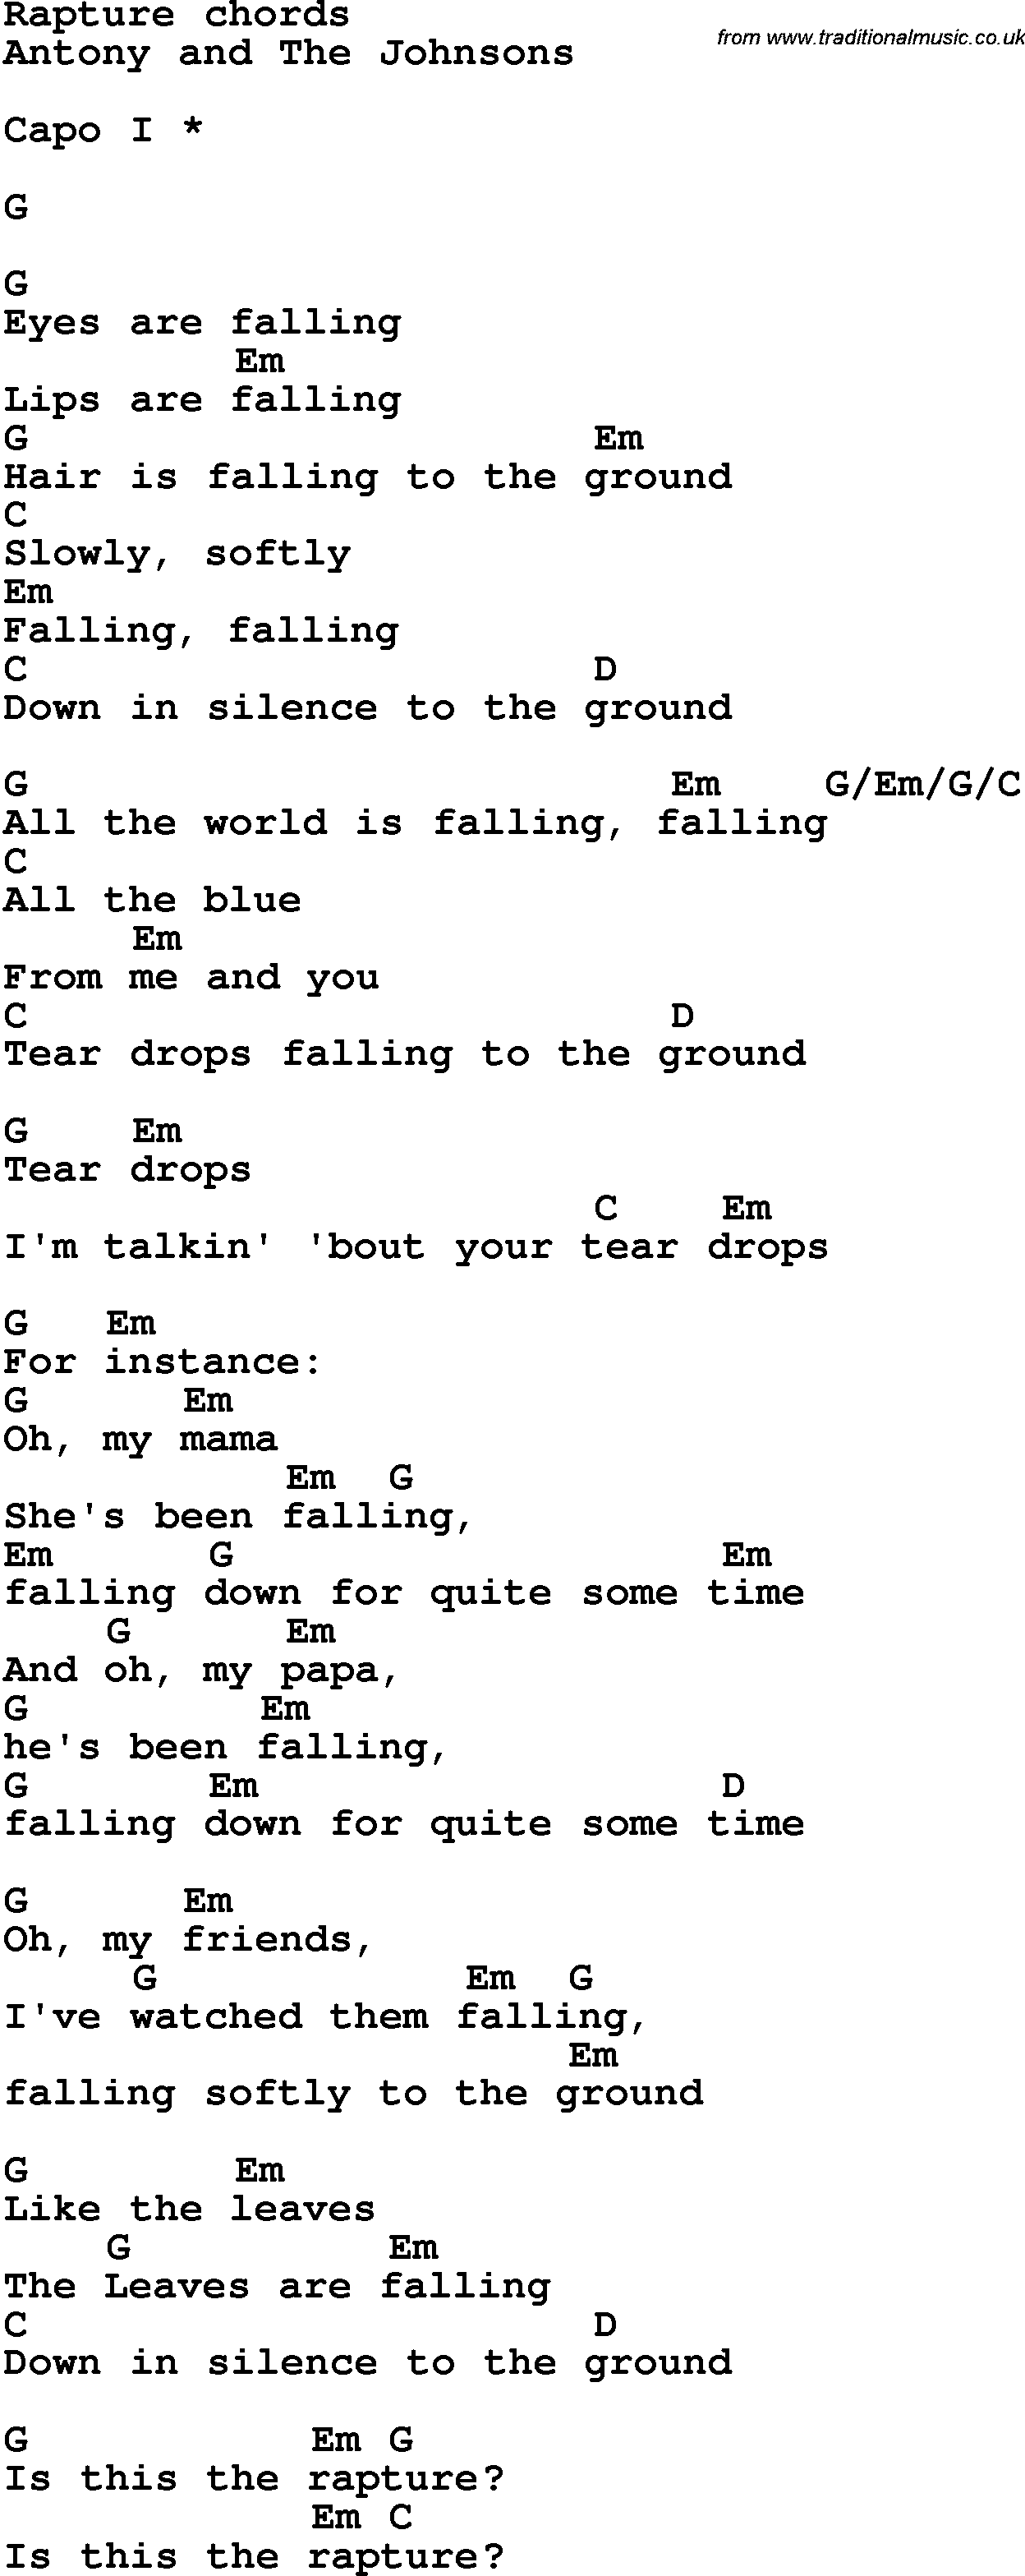 Song Lyrics with guitar chords for Rapture